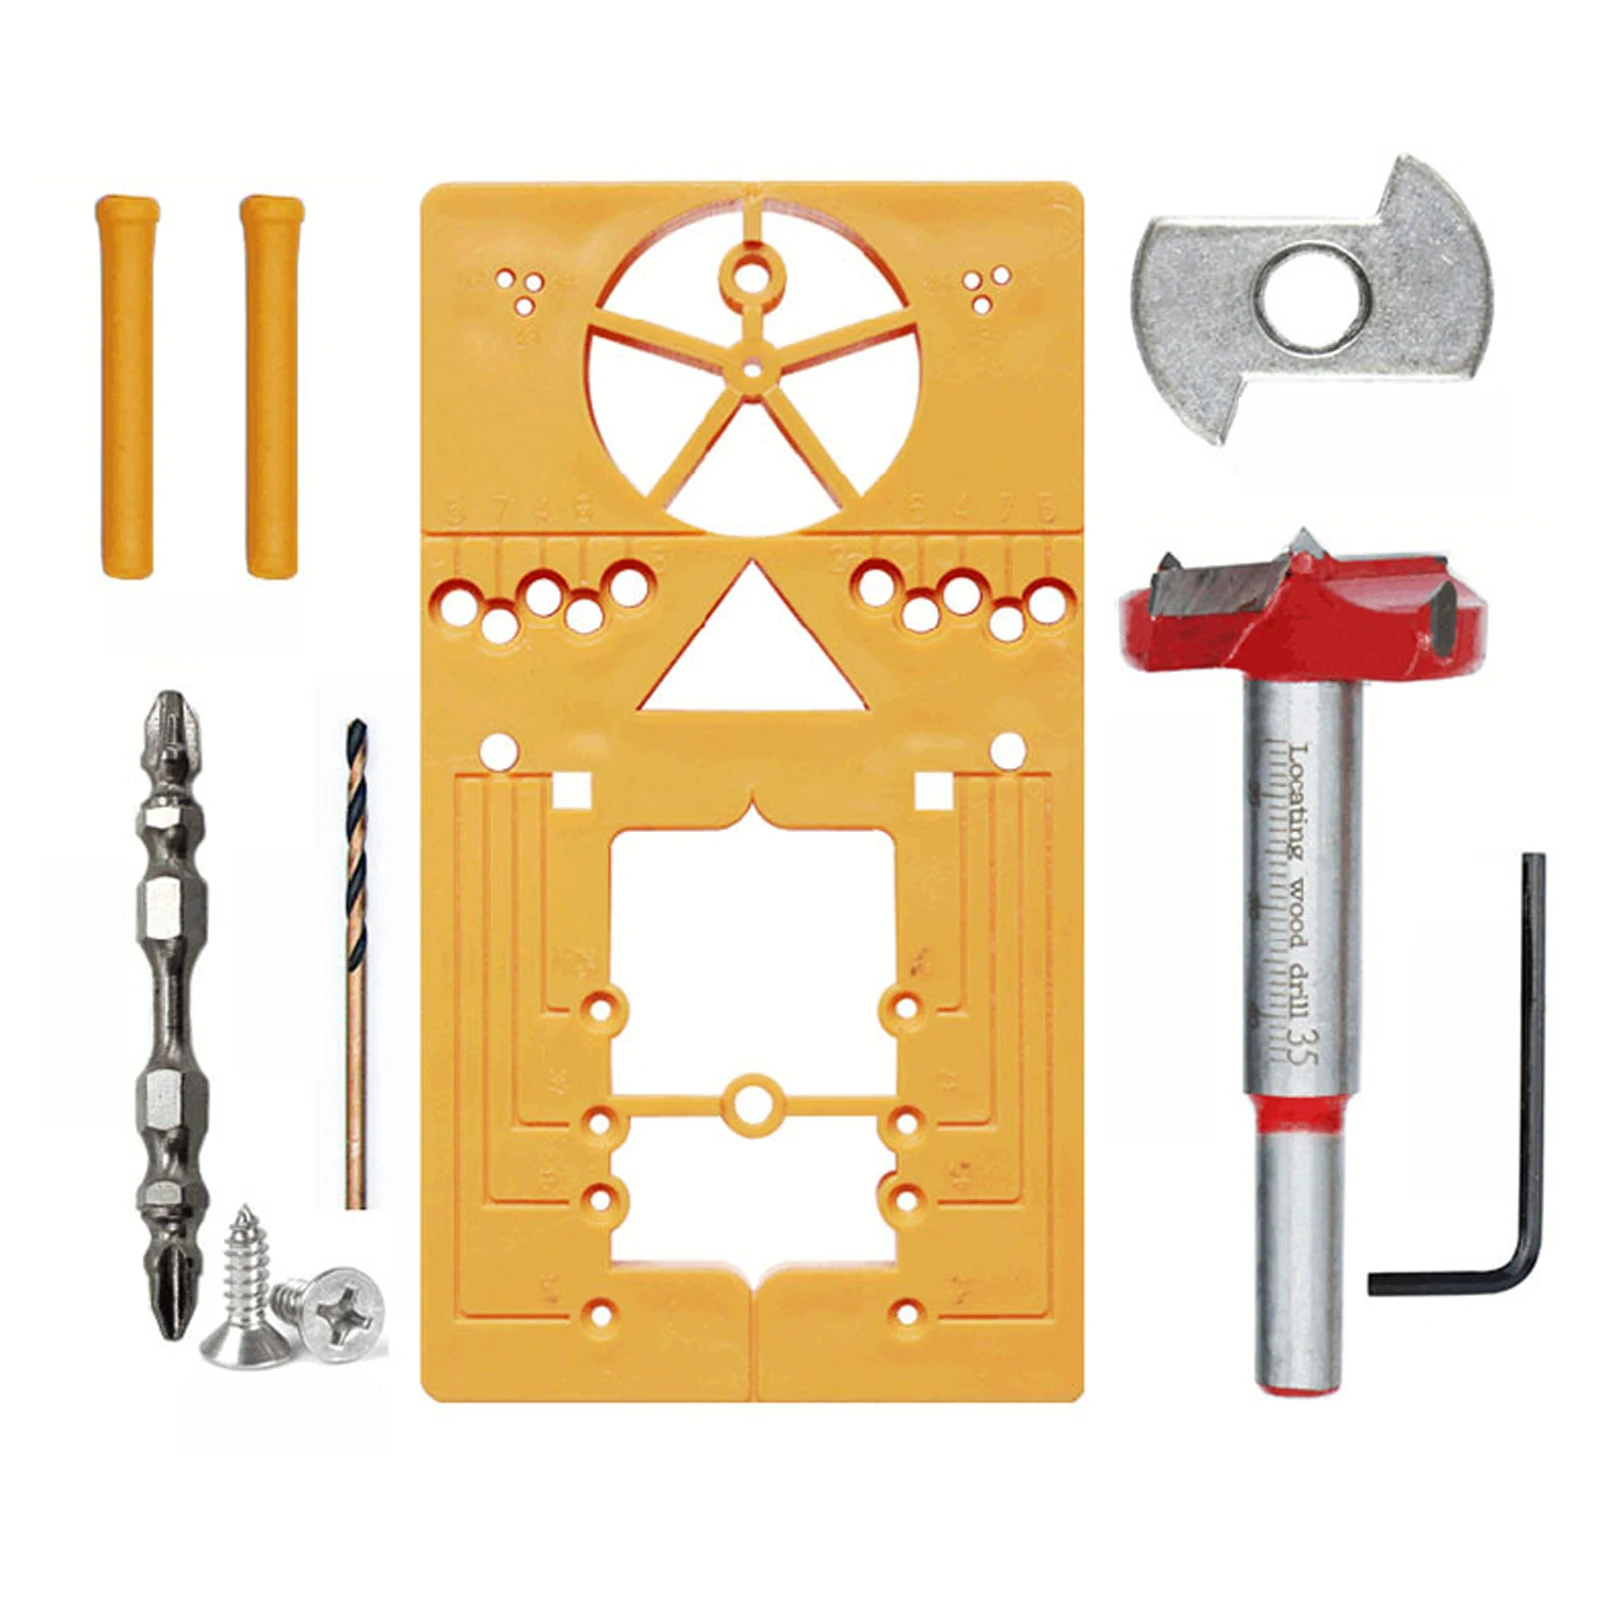 

Hinge Jig Drill Guide Set 35mm Hidden Hinge Hole Saw Jig Drill Guide Locator Bit Set For Cabinet Hinges And Mounting Plates